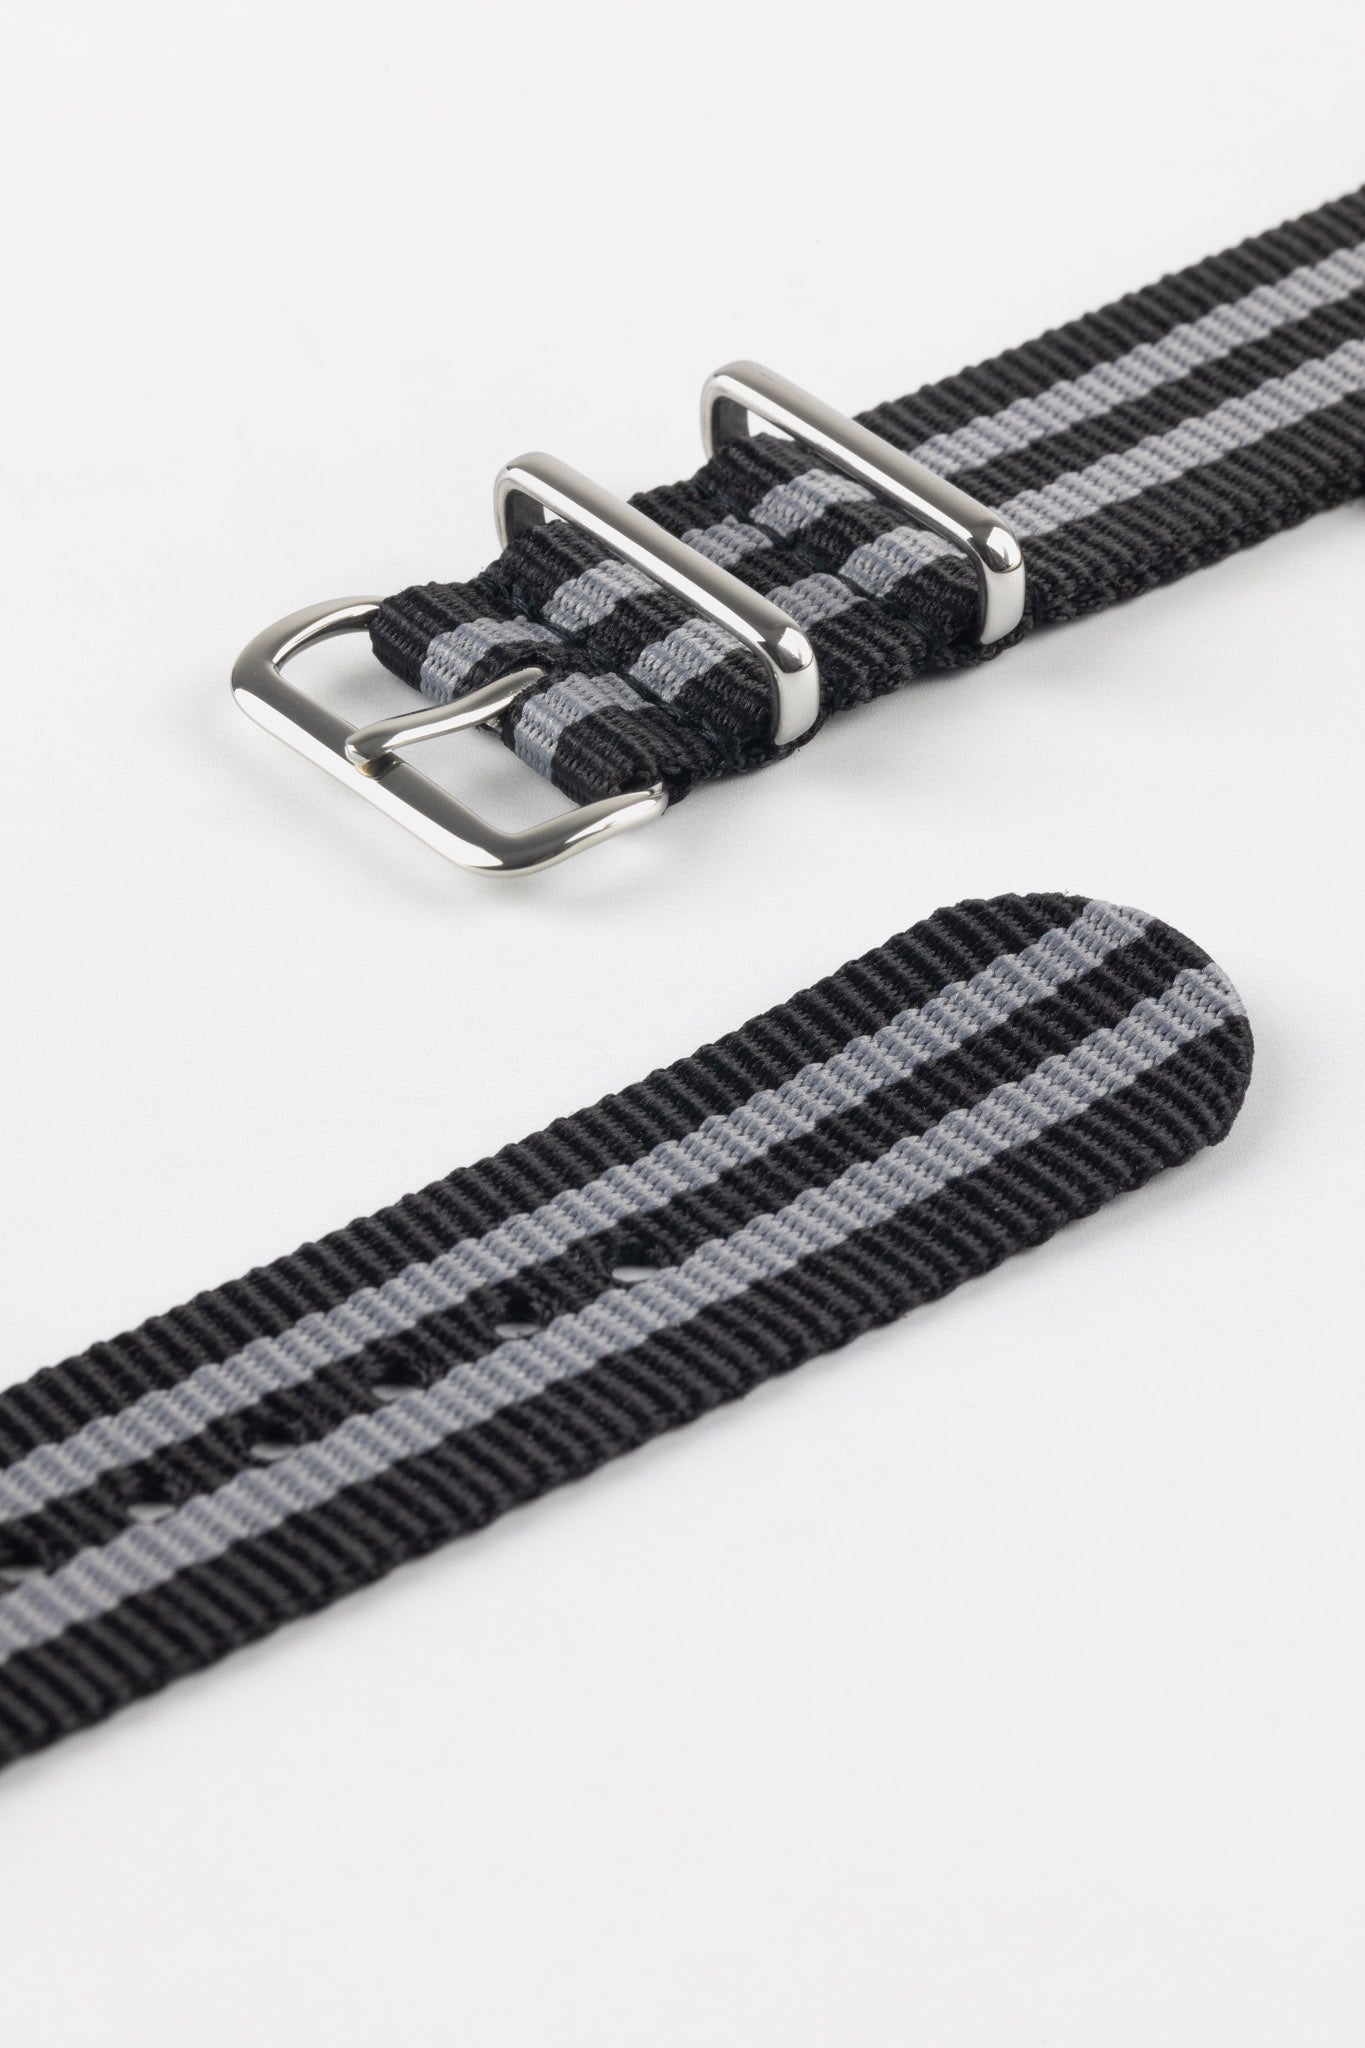 Black and Grey Nato Watch Strap  Hirsch Straps – HS by WatchObsession